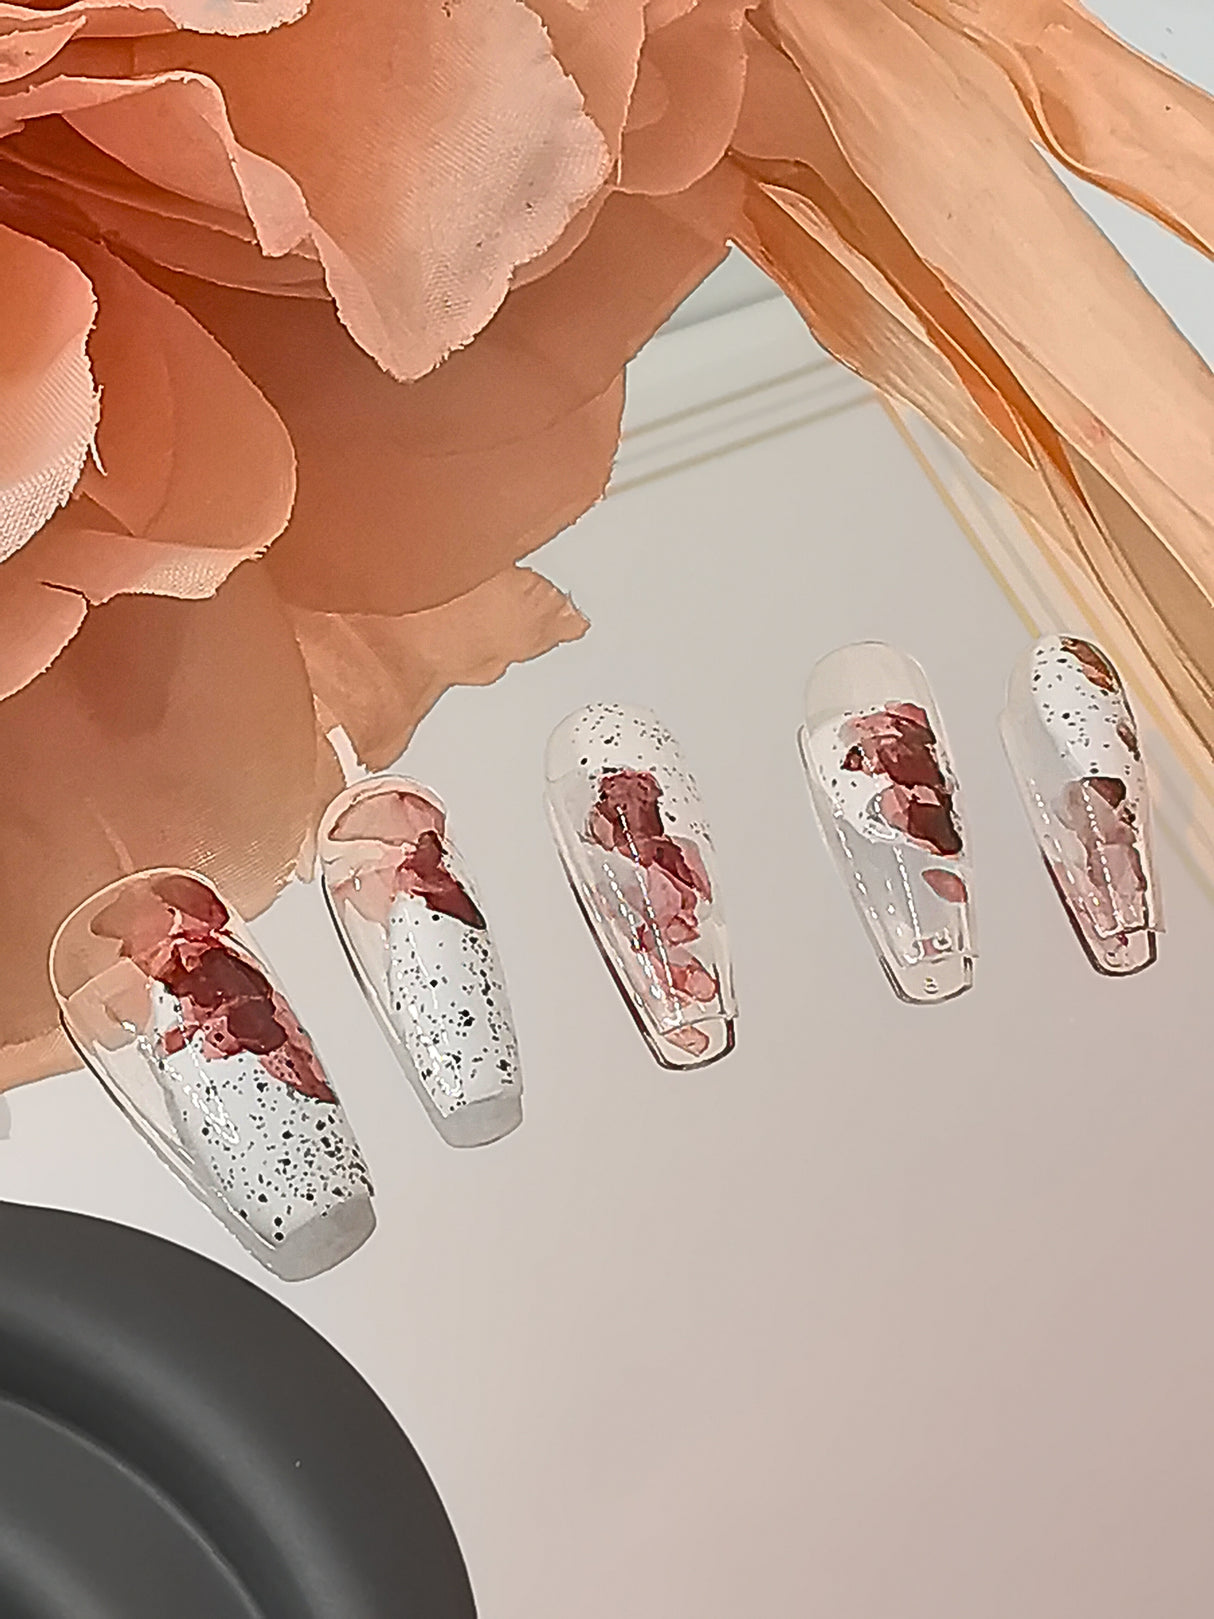 These press-on nail feature a paint-splatter effect in red and black colors, small black speckles for texture. They are long and shaped in a coffin or ballerina style.